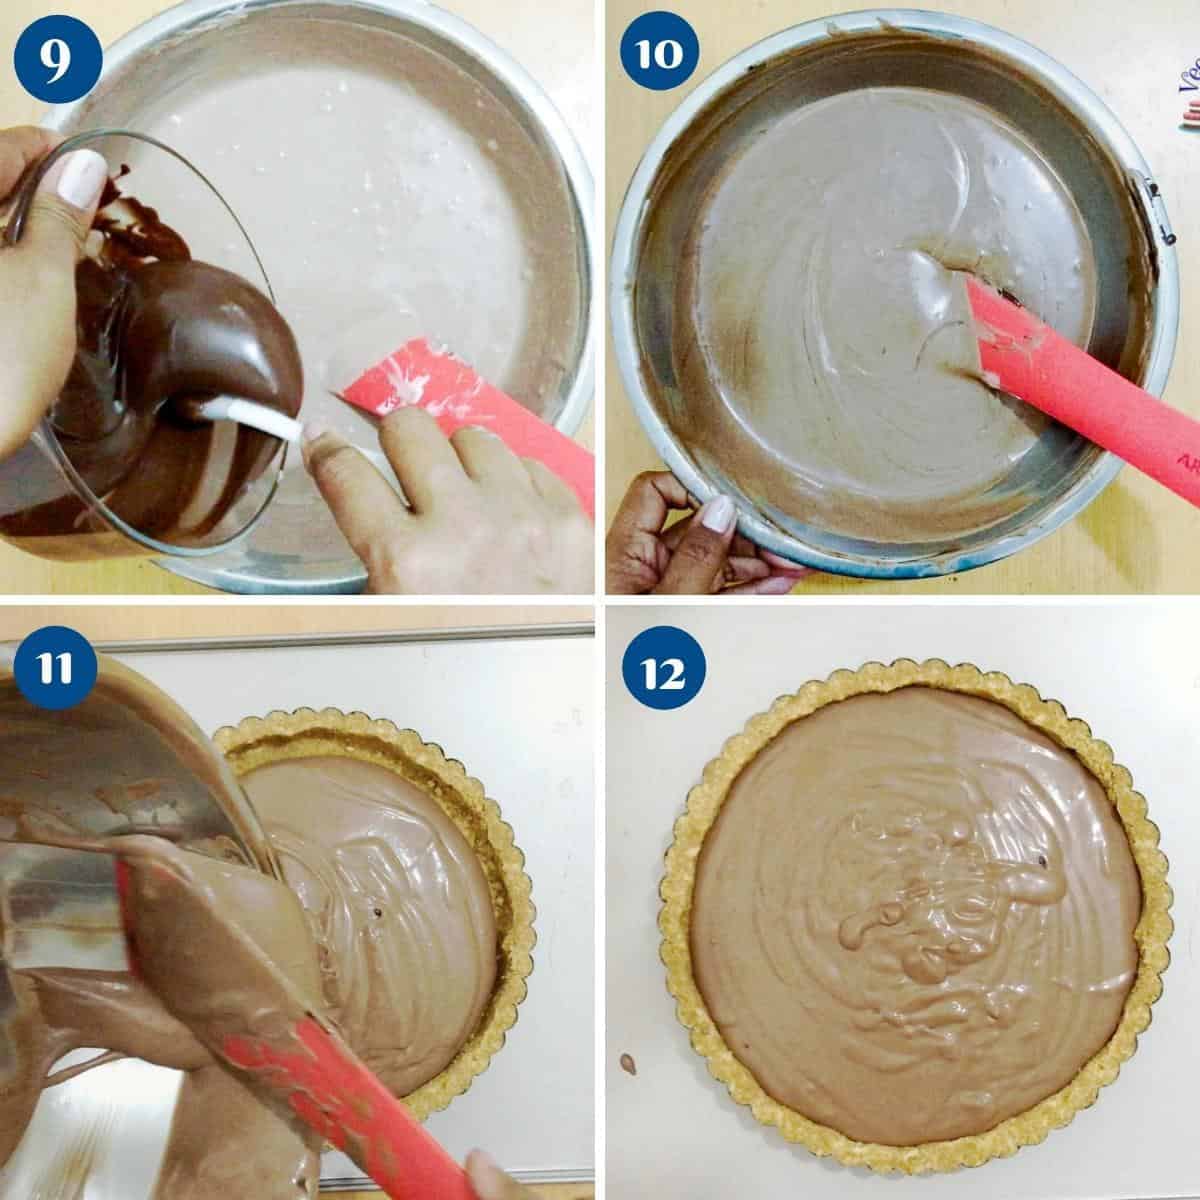 Progress pictures collage making chocolate cheesecake batter.